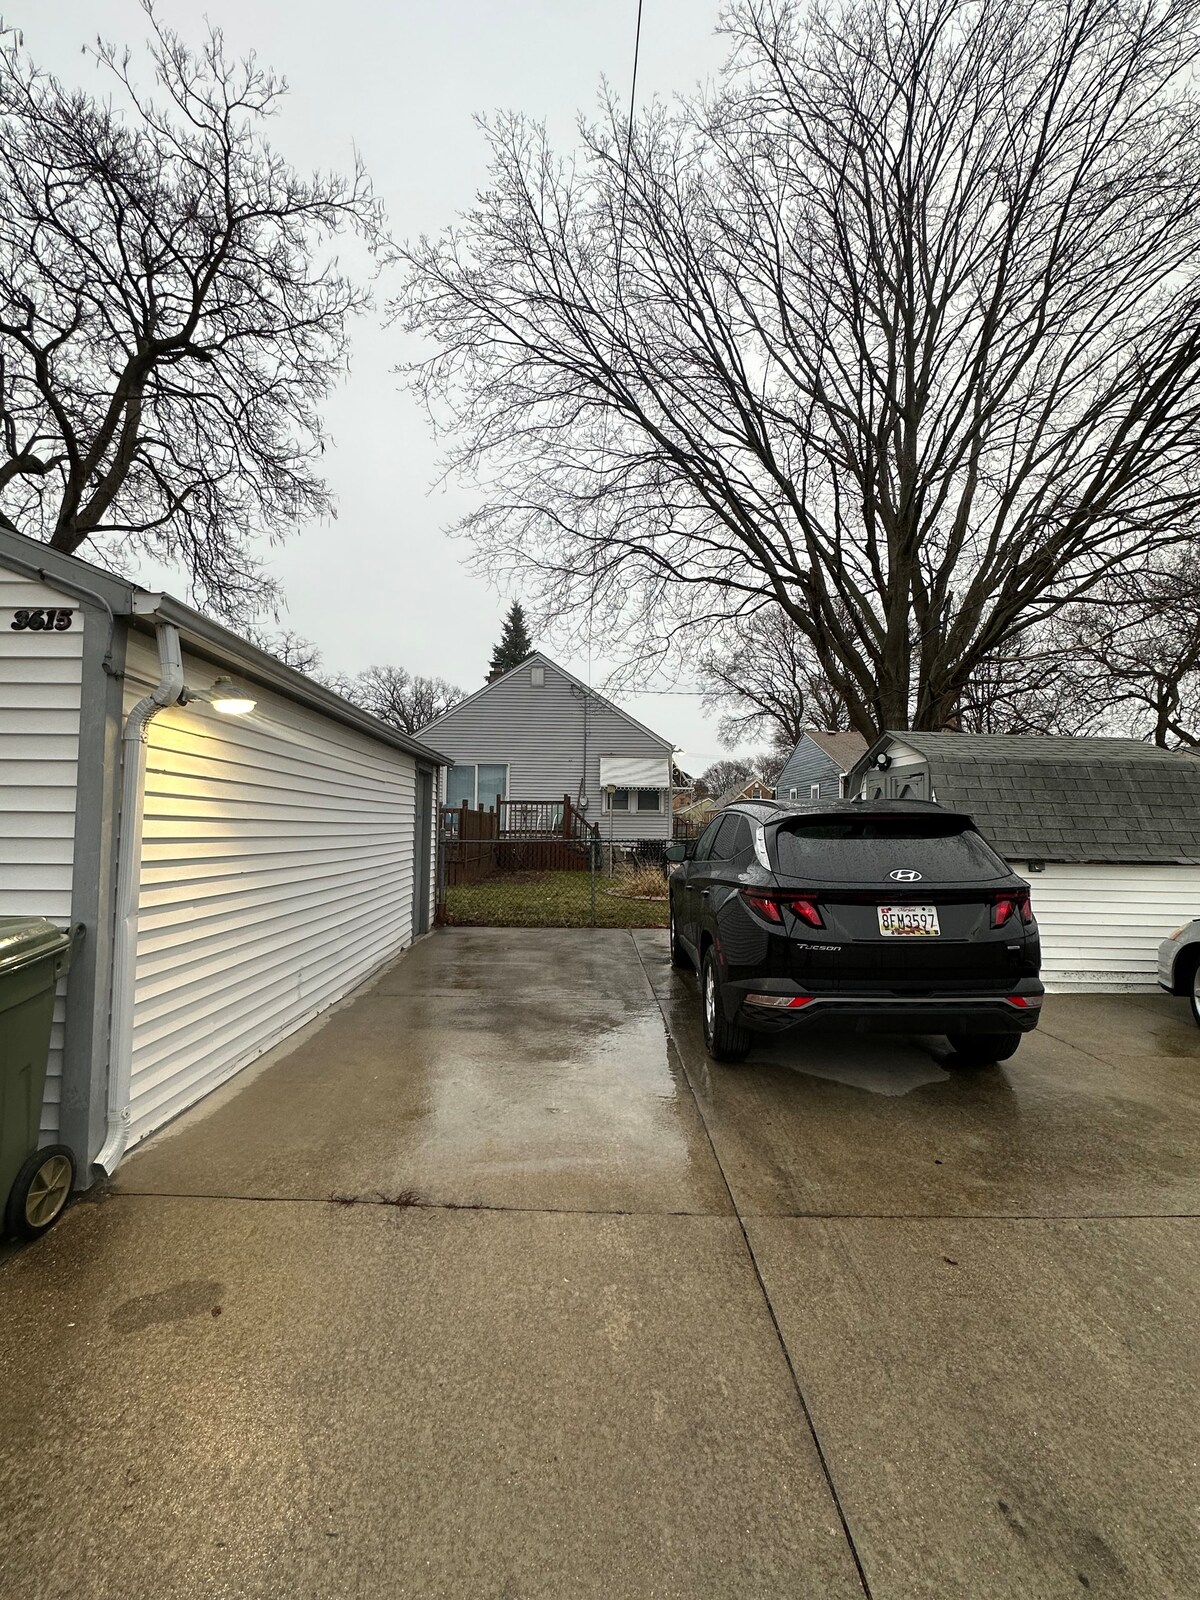 2 bedroom home near downtown MKE